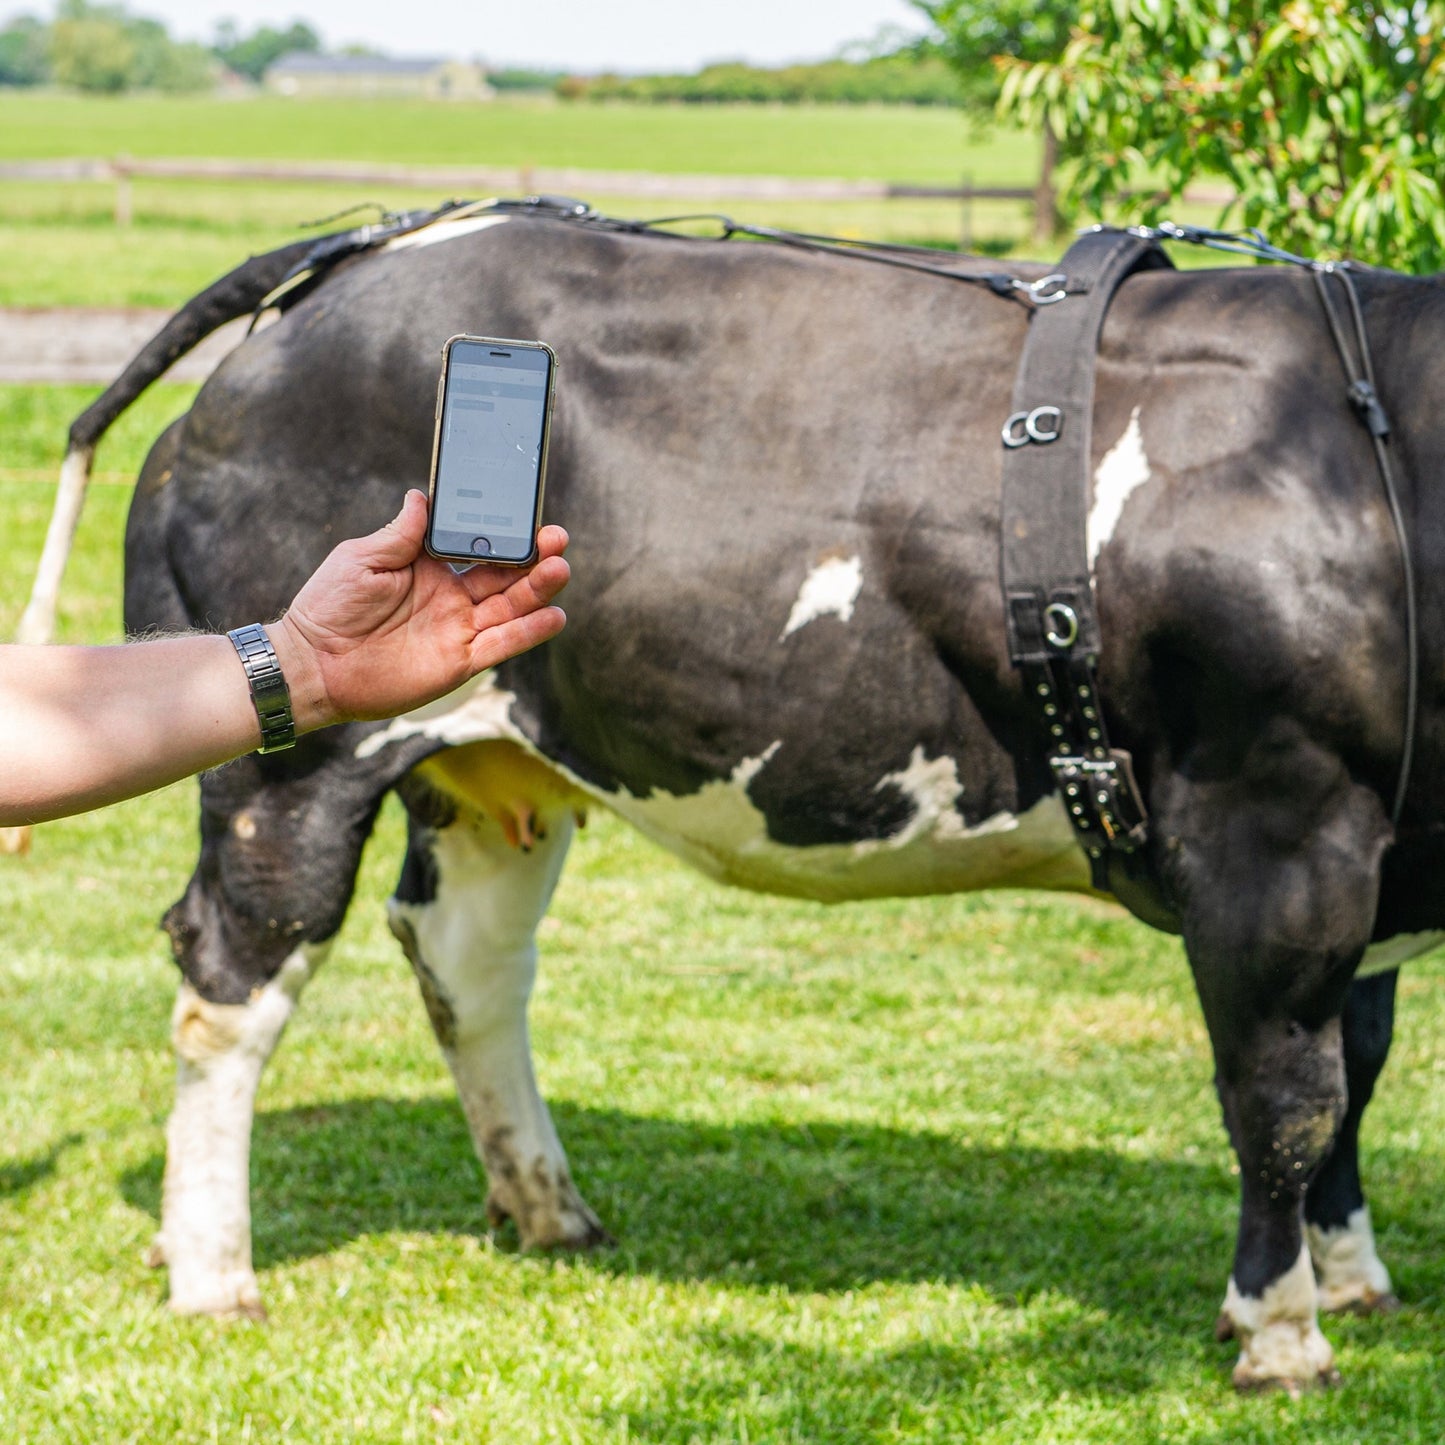 Receiver and transmitter for cows